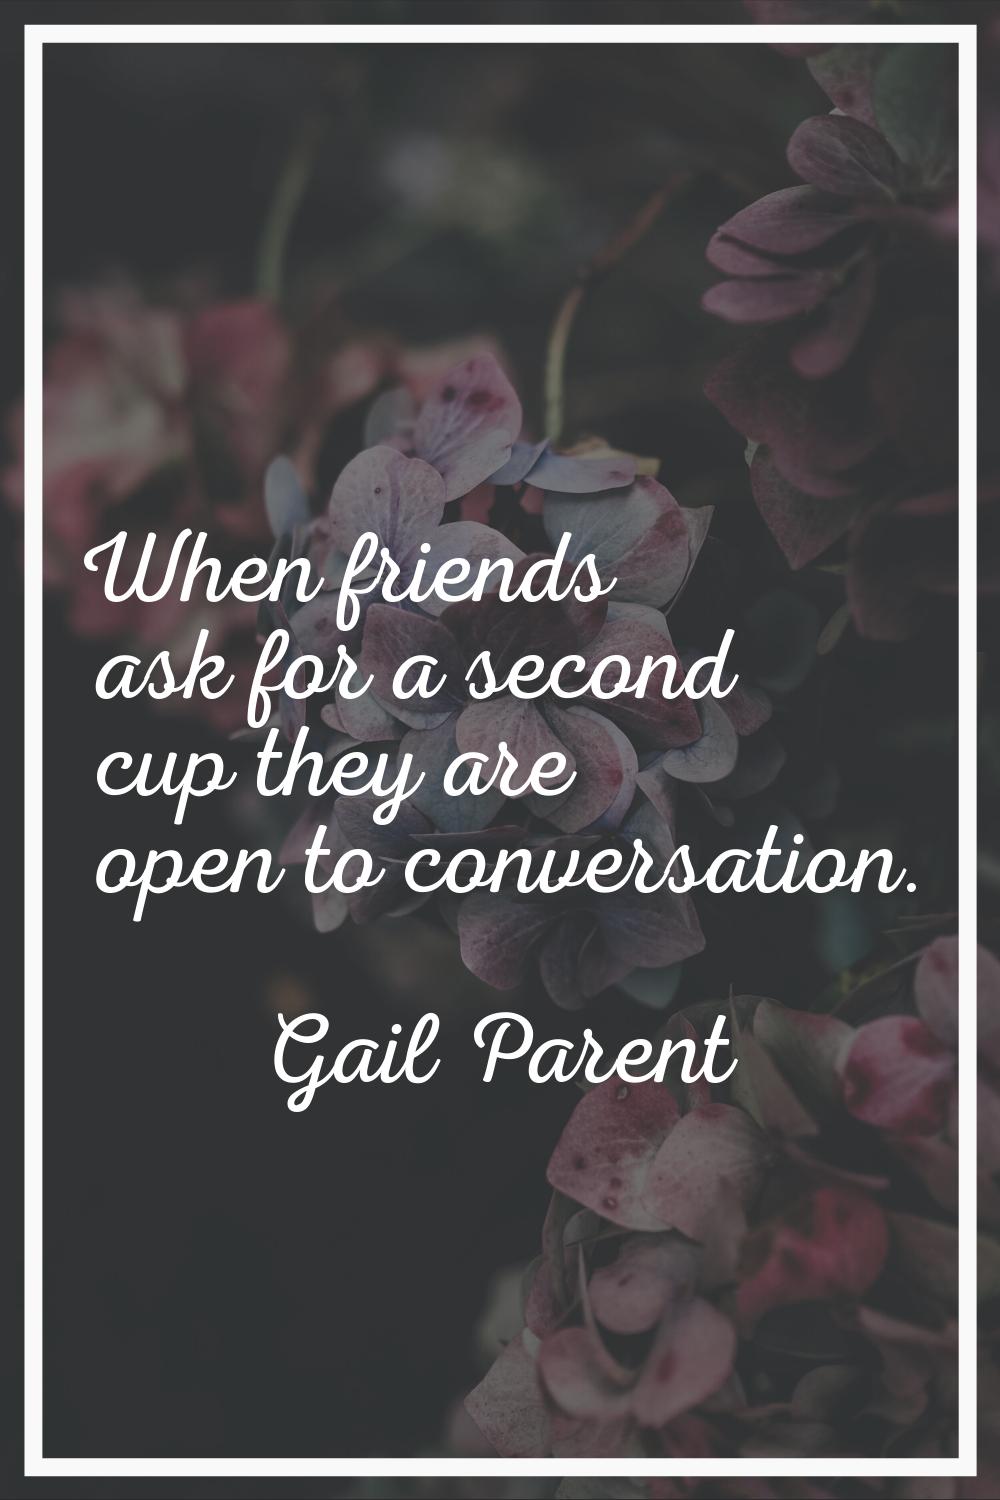 When friends ask for a second cup they are open to conversation.